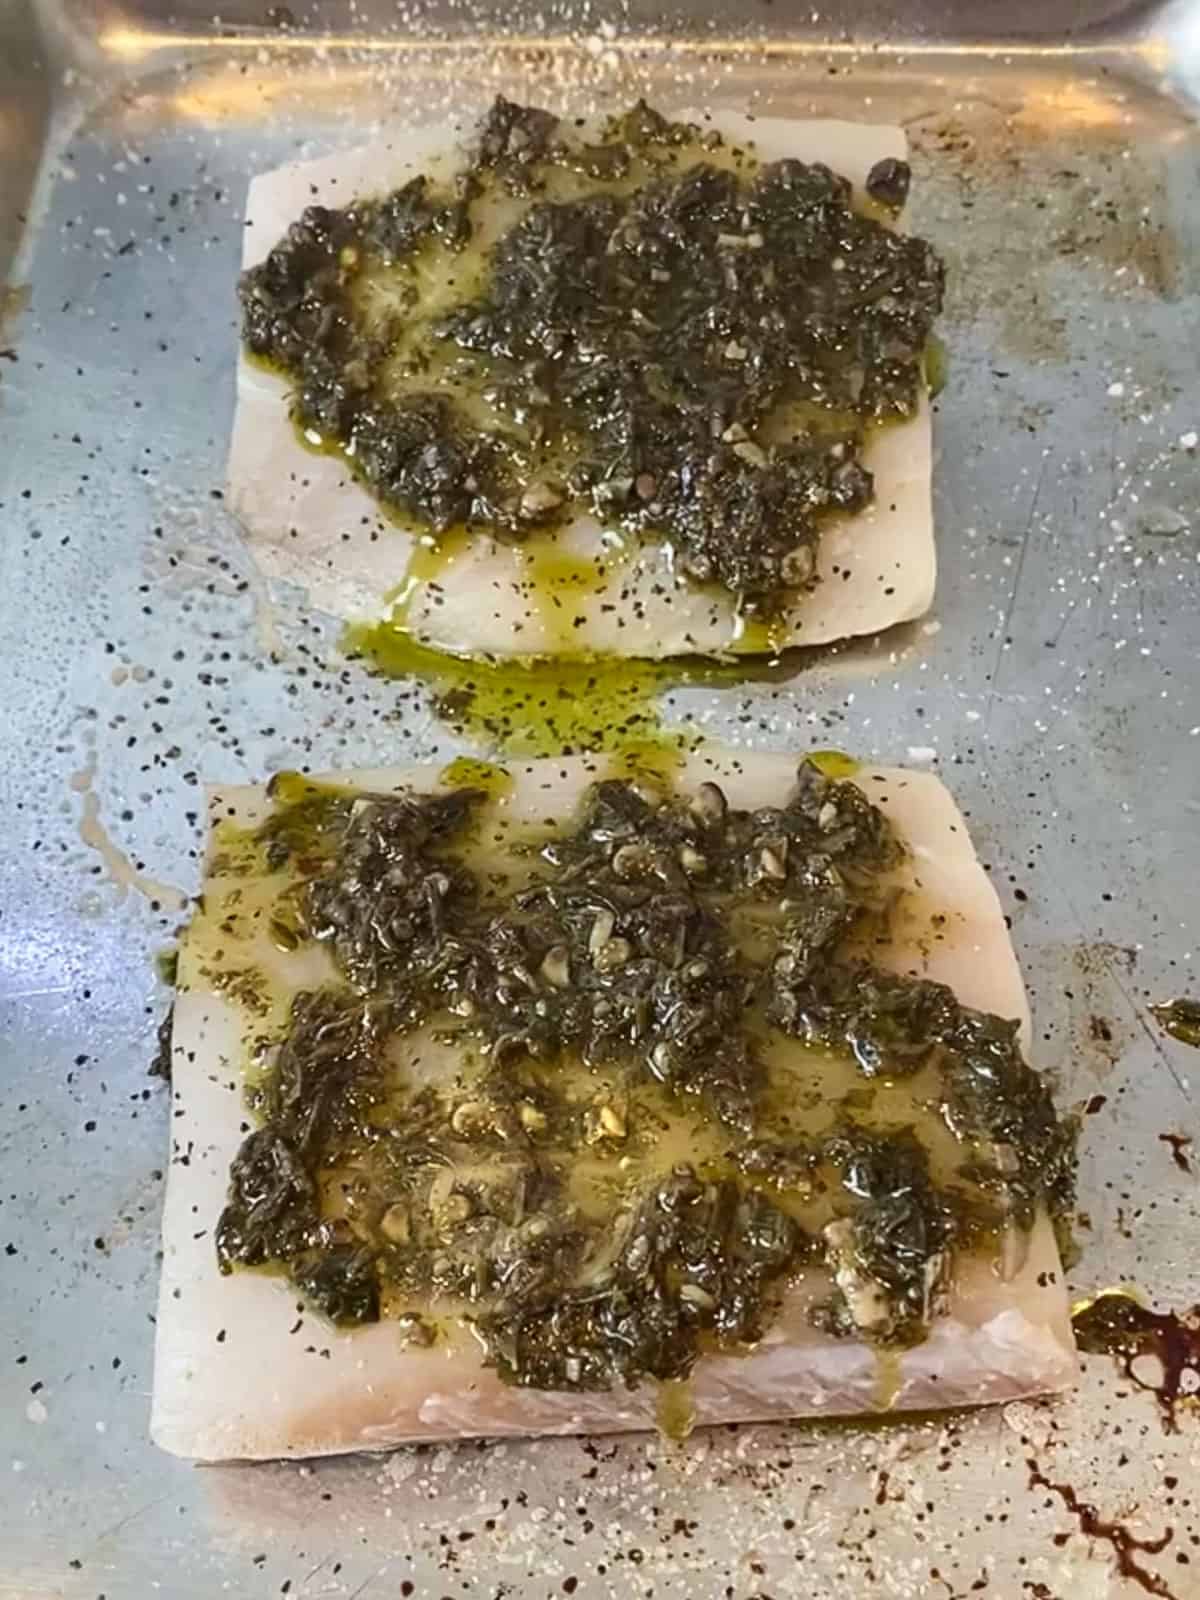 Spread a layer of pesto on top of the halibut filets.